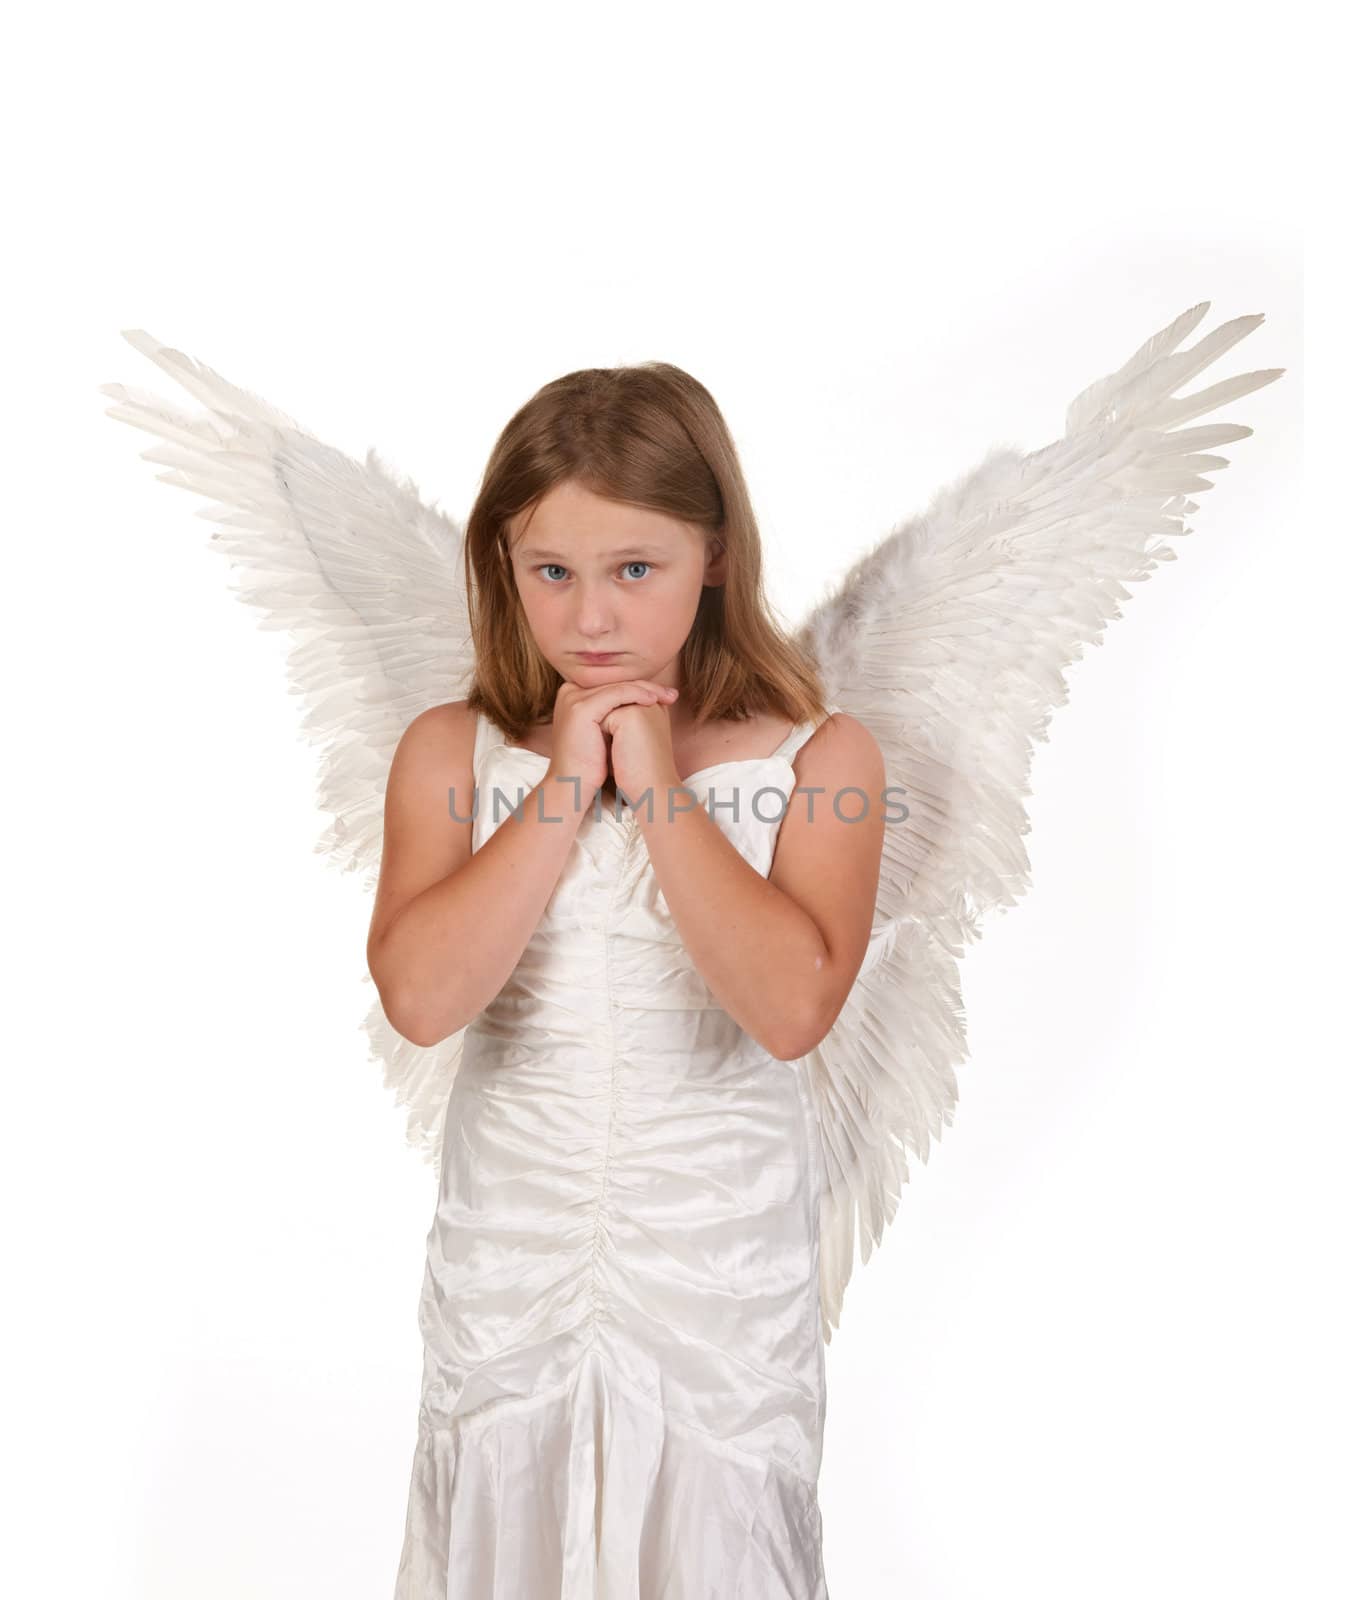 pure and sweet little angel girl isolated white by clearviewstock